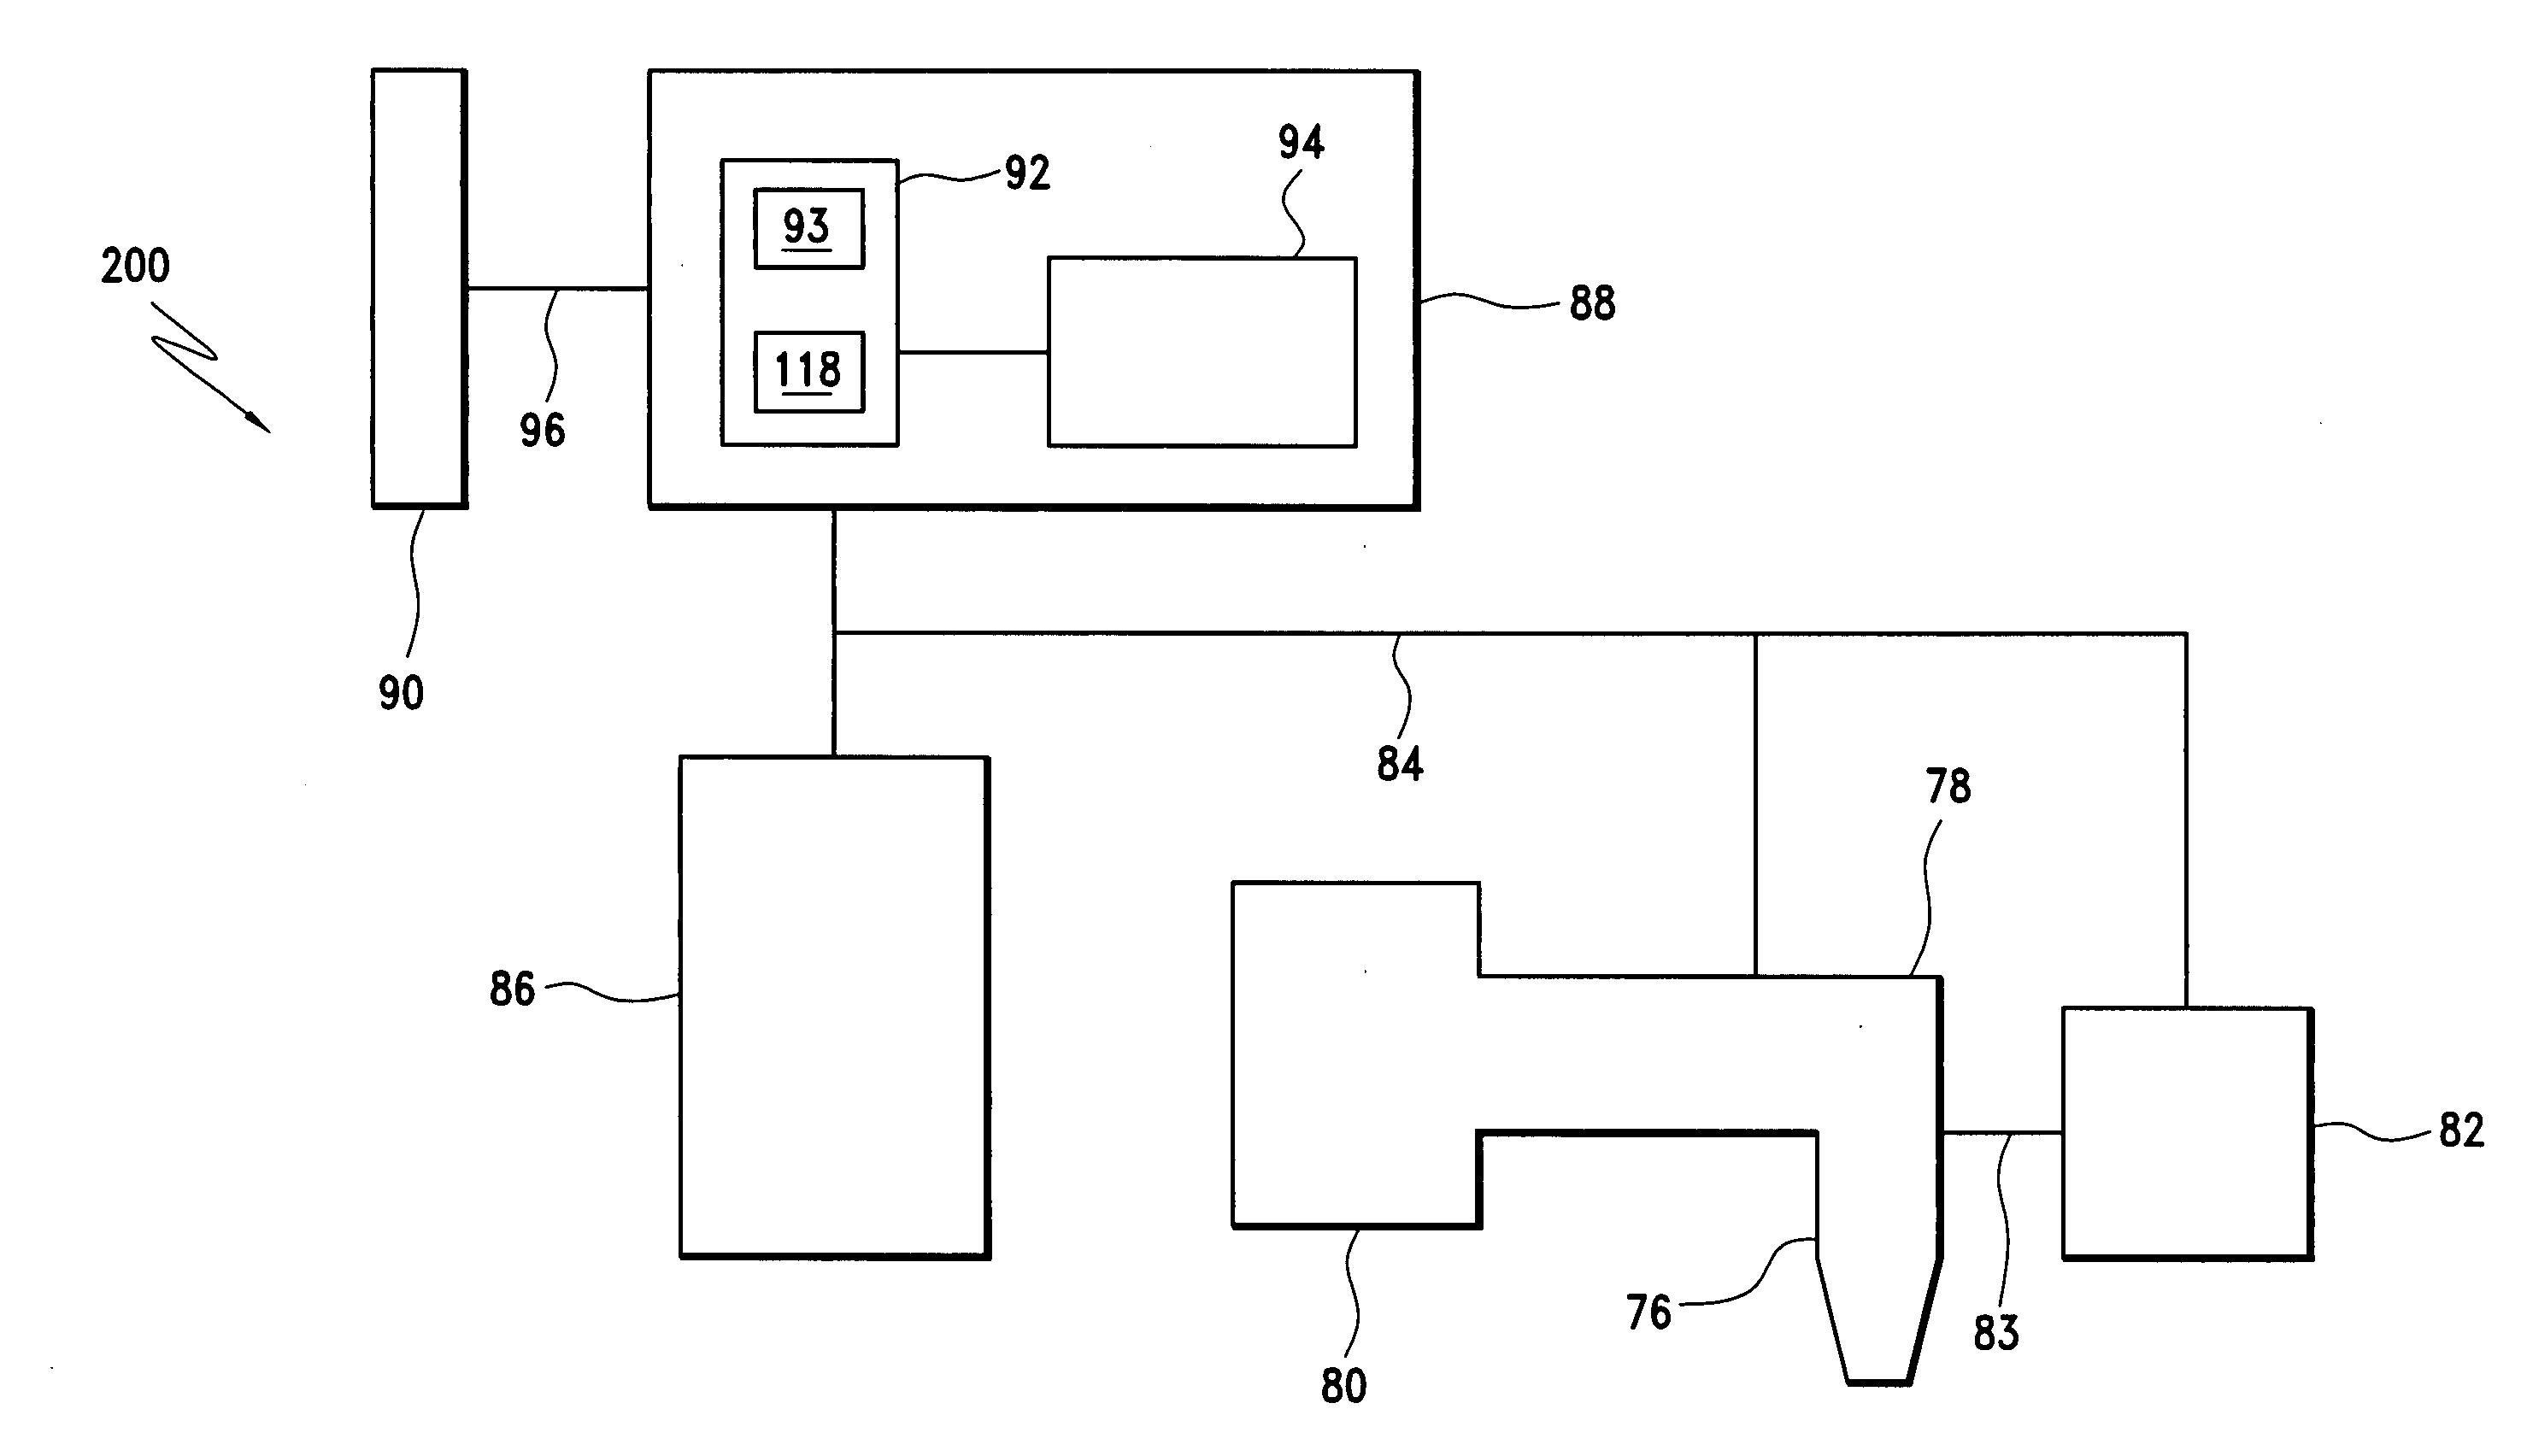 System and process for manufacturing application specific printable circuits (ASPC'S) and other custom electronic devices